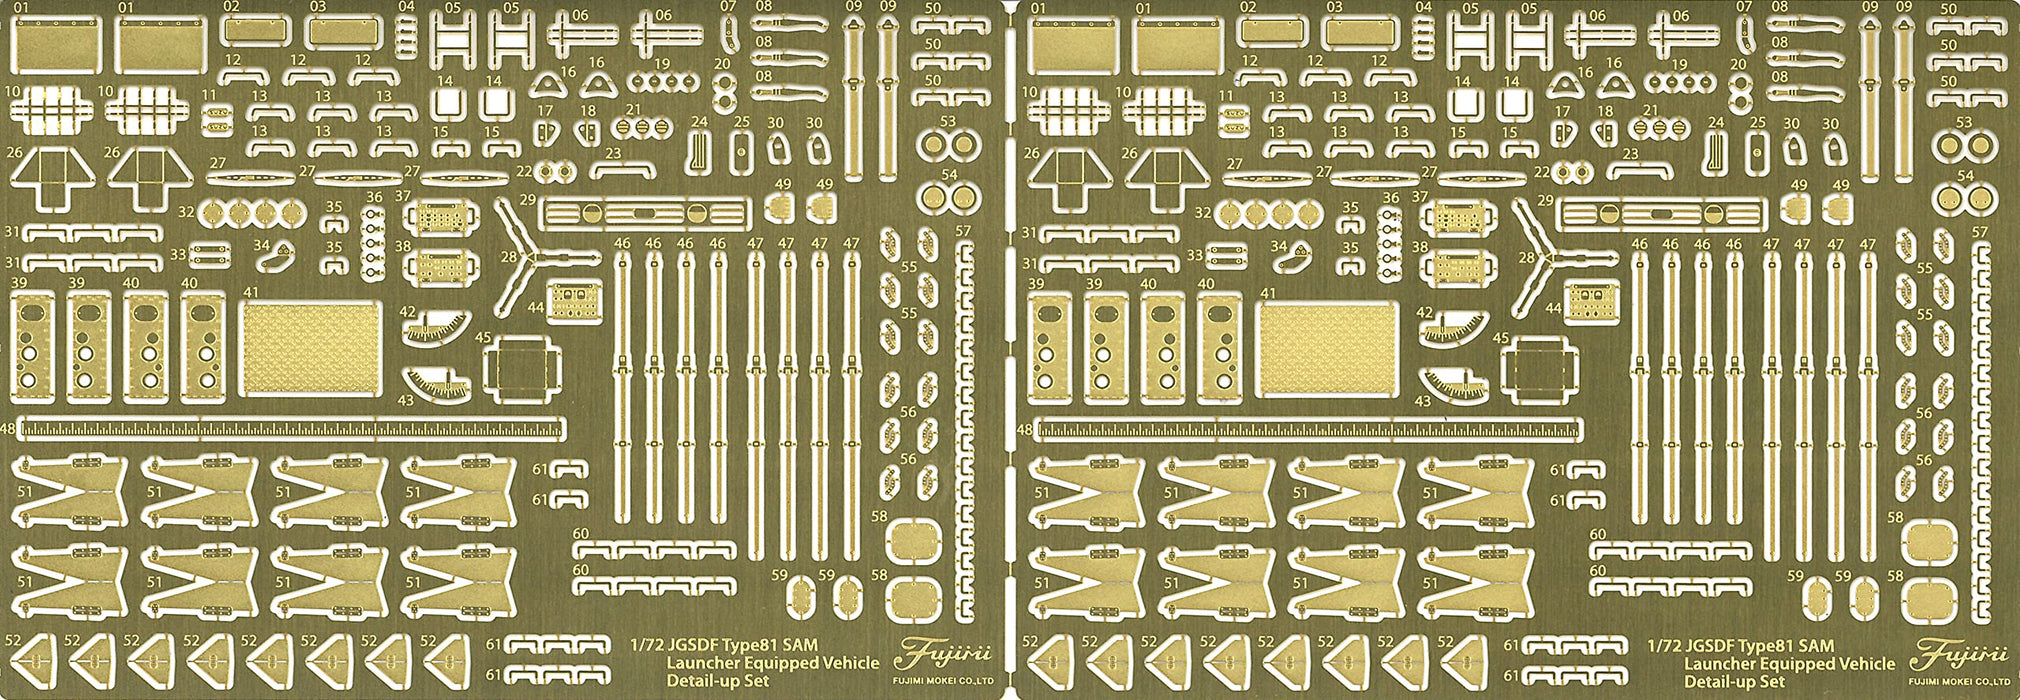 FUJIMI 1/72 Military Series Jgsdf Type 81 Missile Control Device / Launcher Genuine Etching Parts